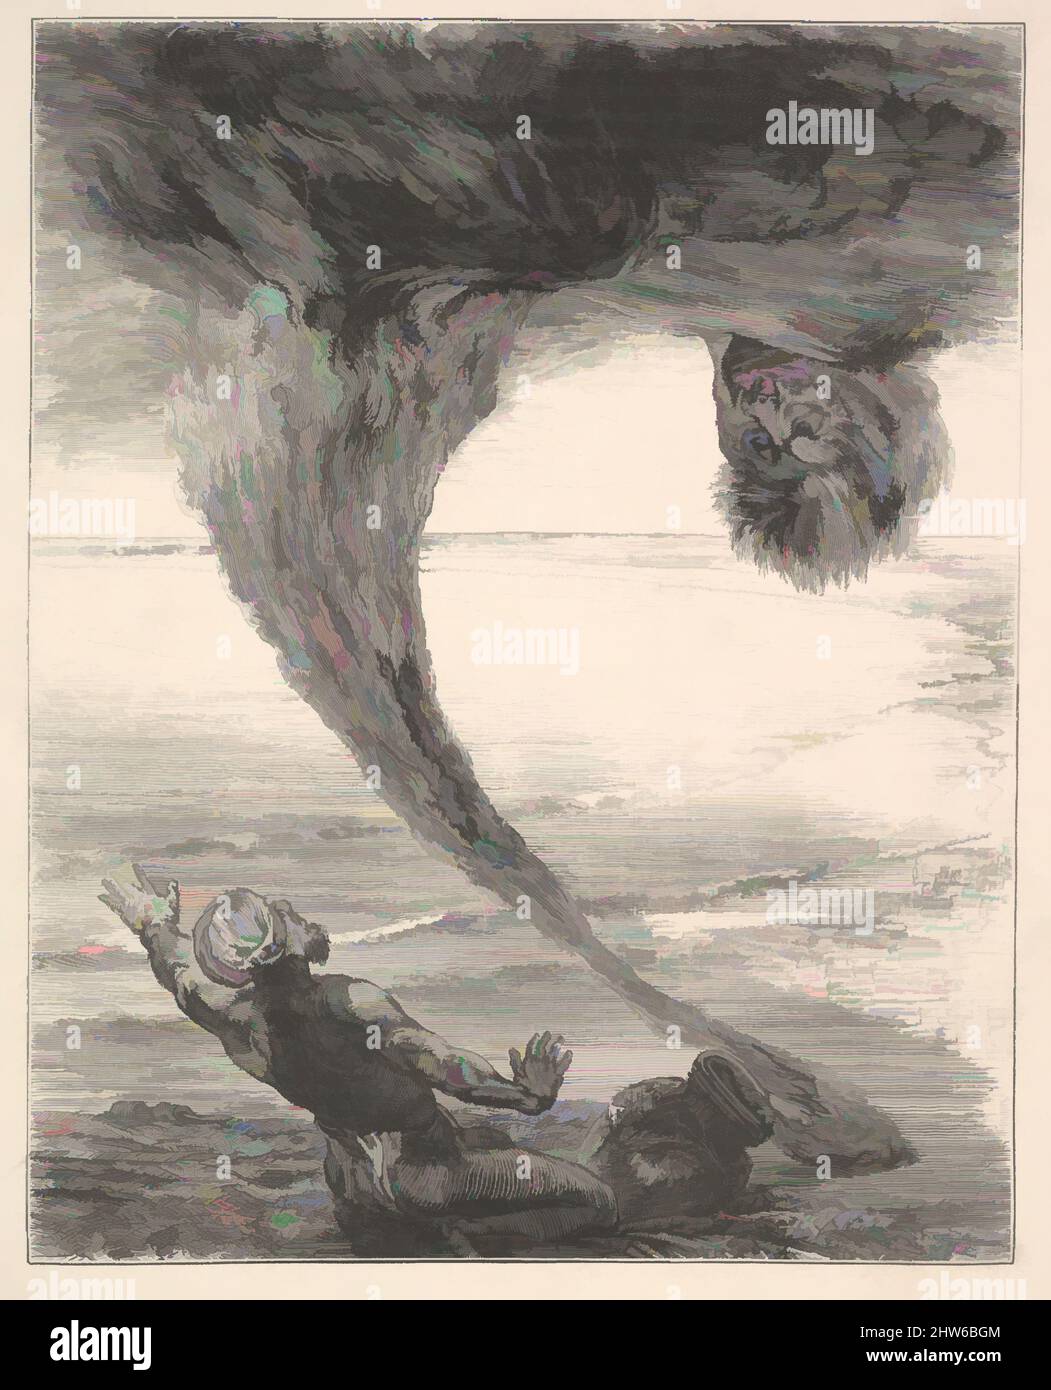 Art inspired by The Fisherman and the Afrite (or Genie), 1868, Wood engraving, image: 6 13/16 x 5 3/8 in. (17.3 x 13.7 cm), Prints, Designed by John La Farge (American, New York 1835–1910 Providence, Rhode Island), Engraved by Henry Marsh (American, 1826–1912, Classic works modernized by Artotop with a splash of modernity. Shapes, color and value, eye-catching visual impact on art. Emotions through freedom of artworks in a contemporary way. A timeless message pursuing a wildly creative new direction. Artists turning to the digital medium and creating the Artotop NFT Stock Photo